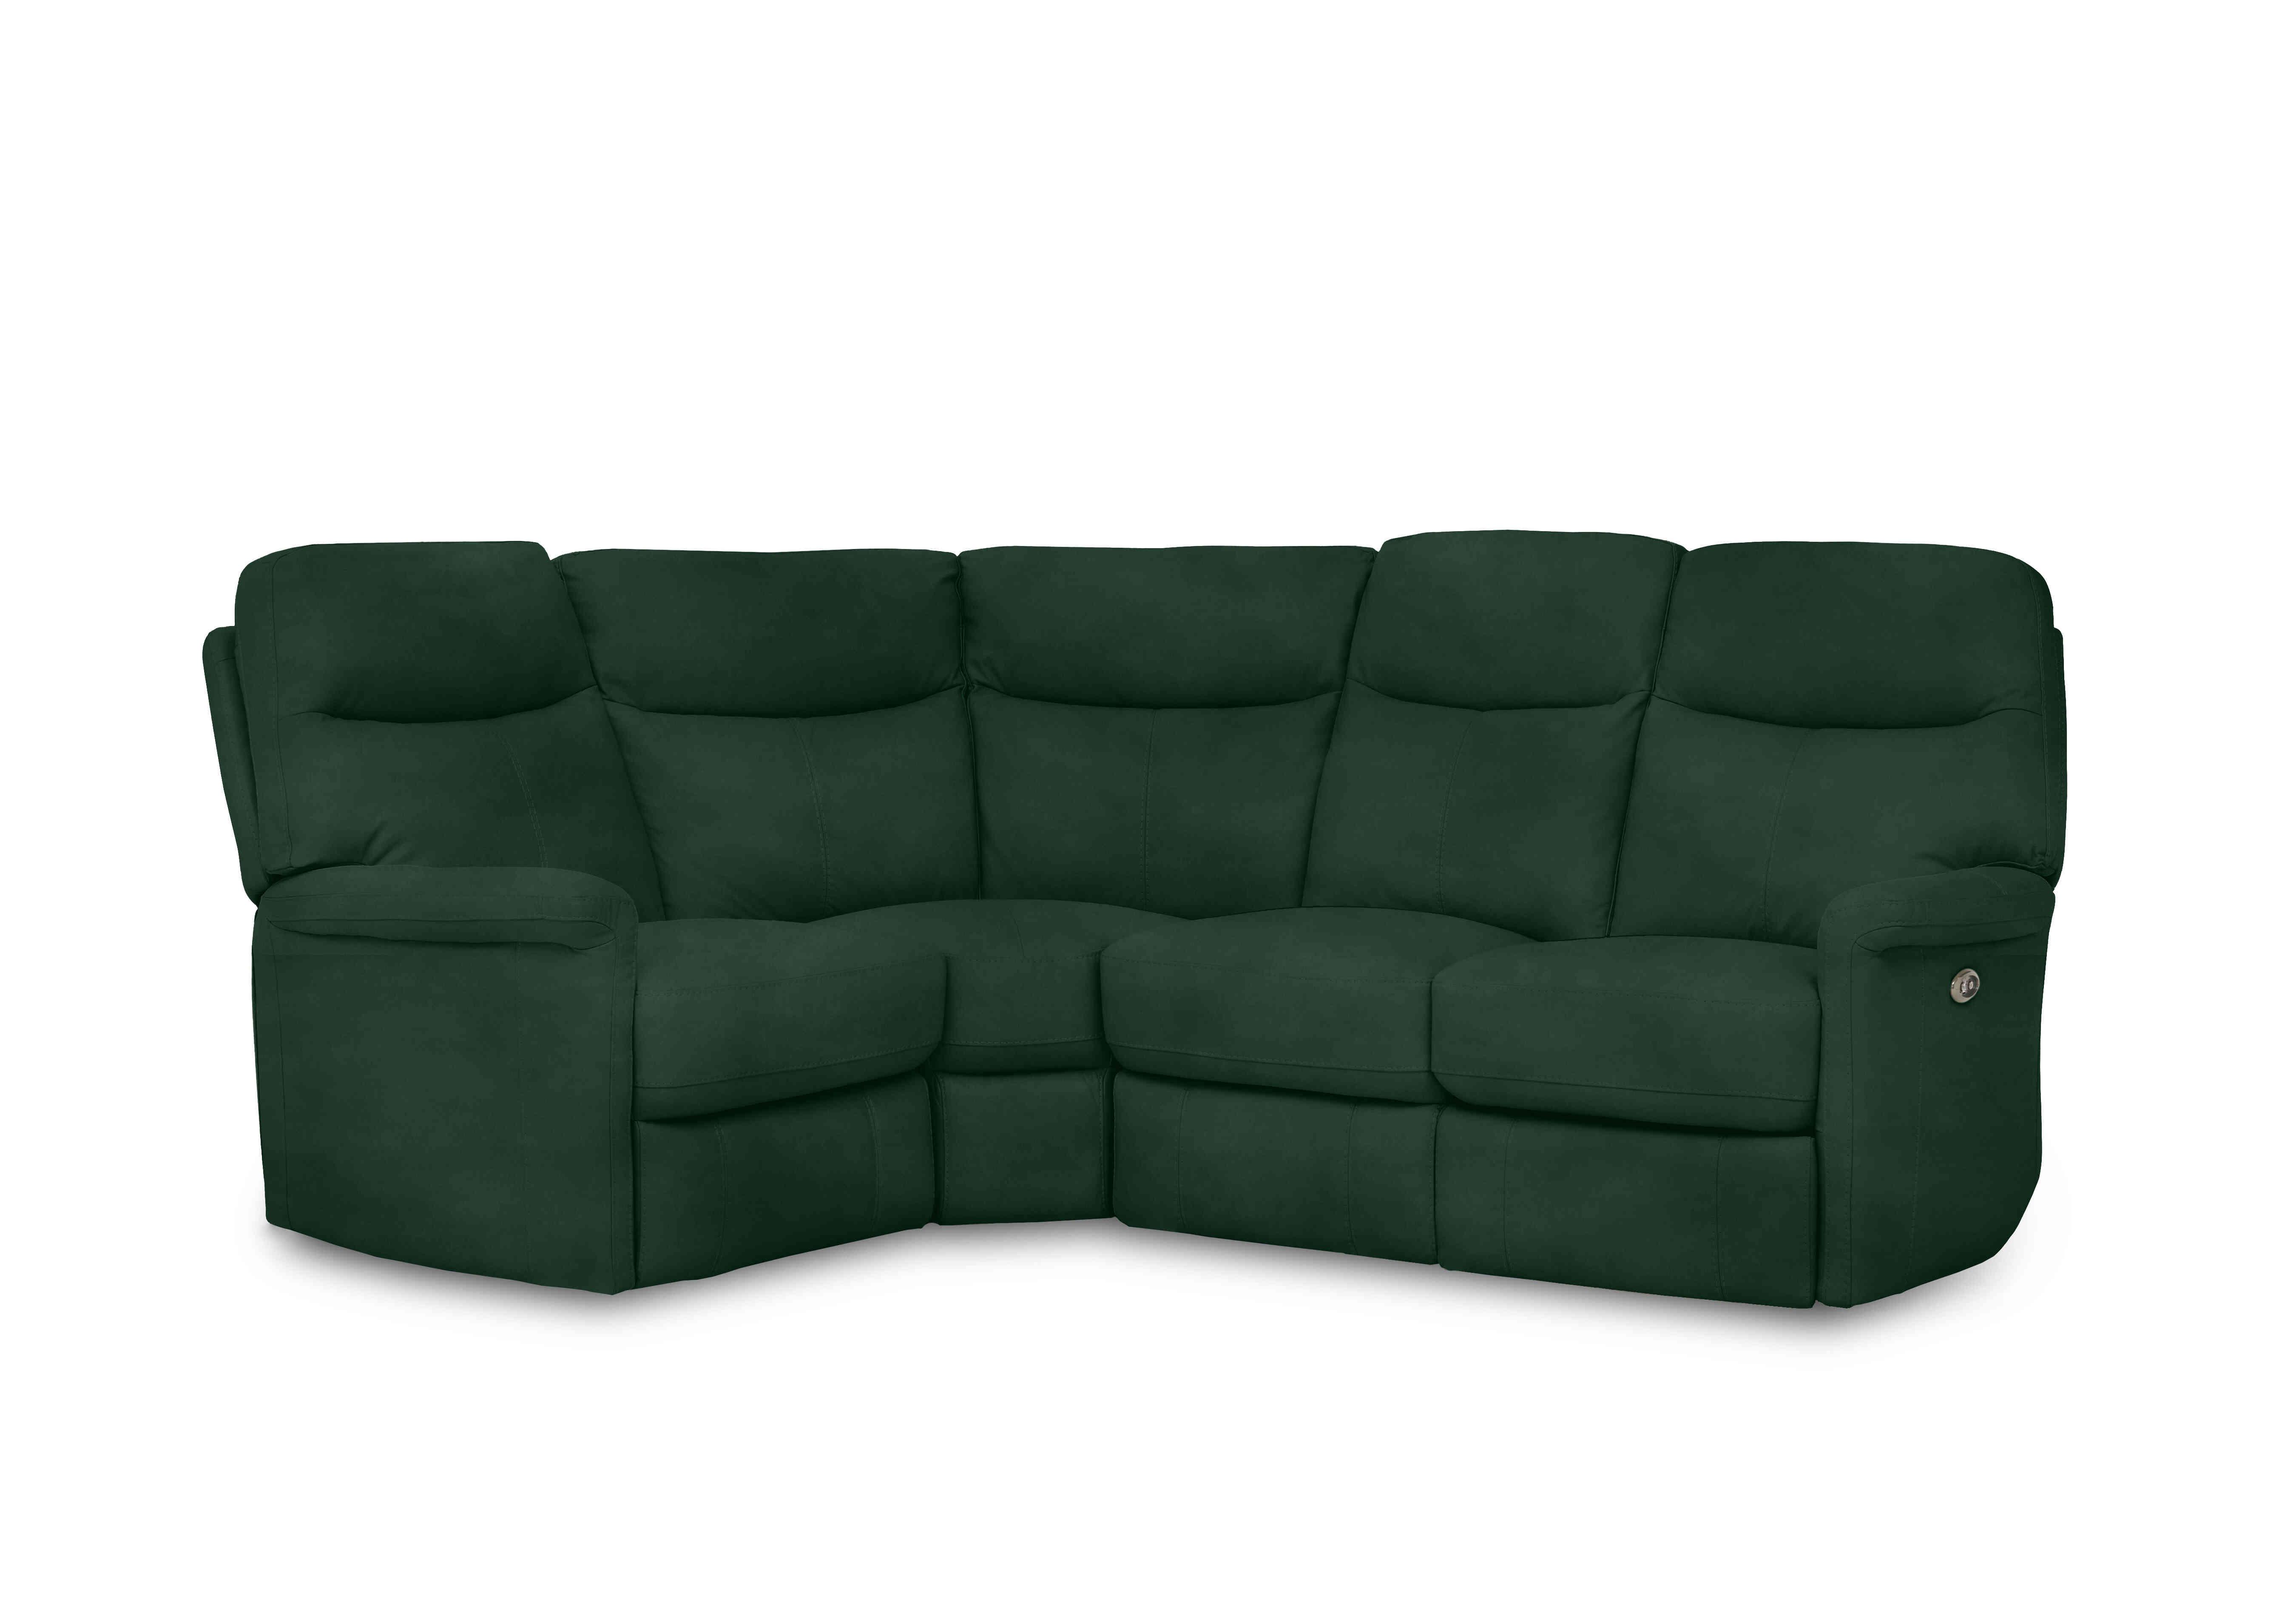 Compact Collection Lille Fabric Corner Sofa in Fab-Meg-R37 Emerald Green on Furniture Village